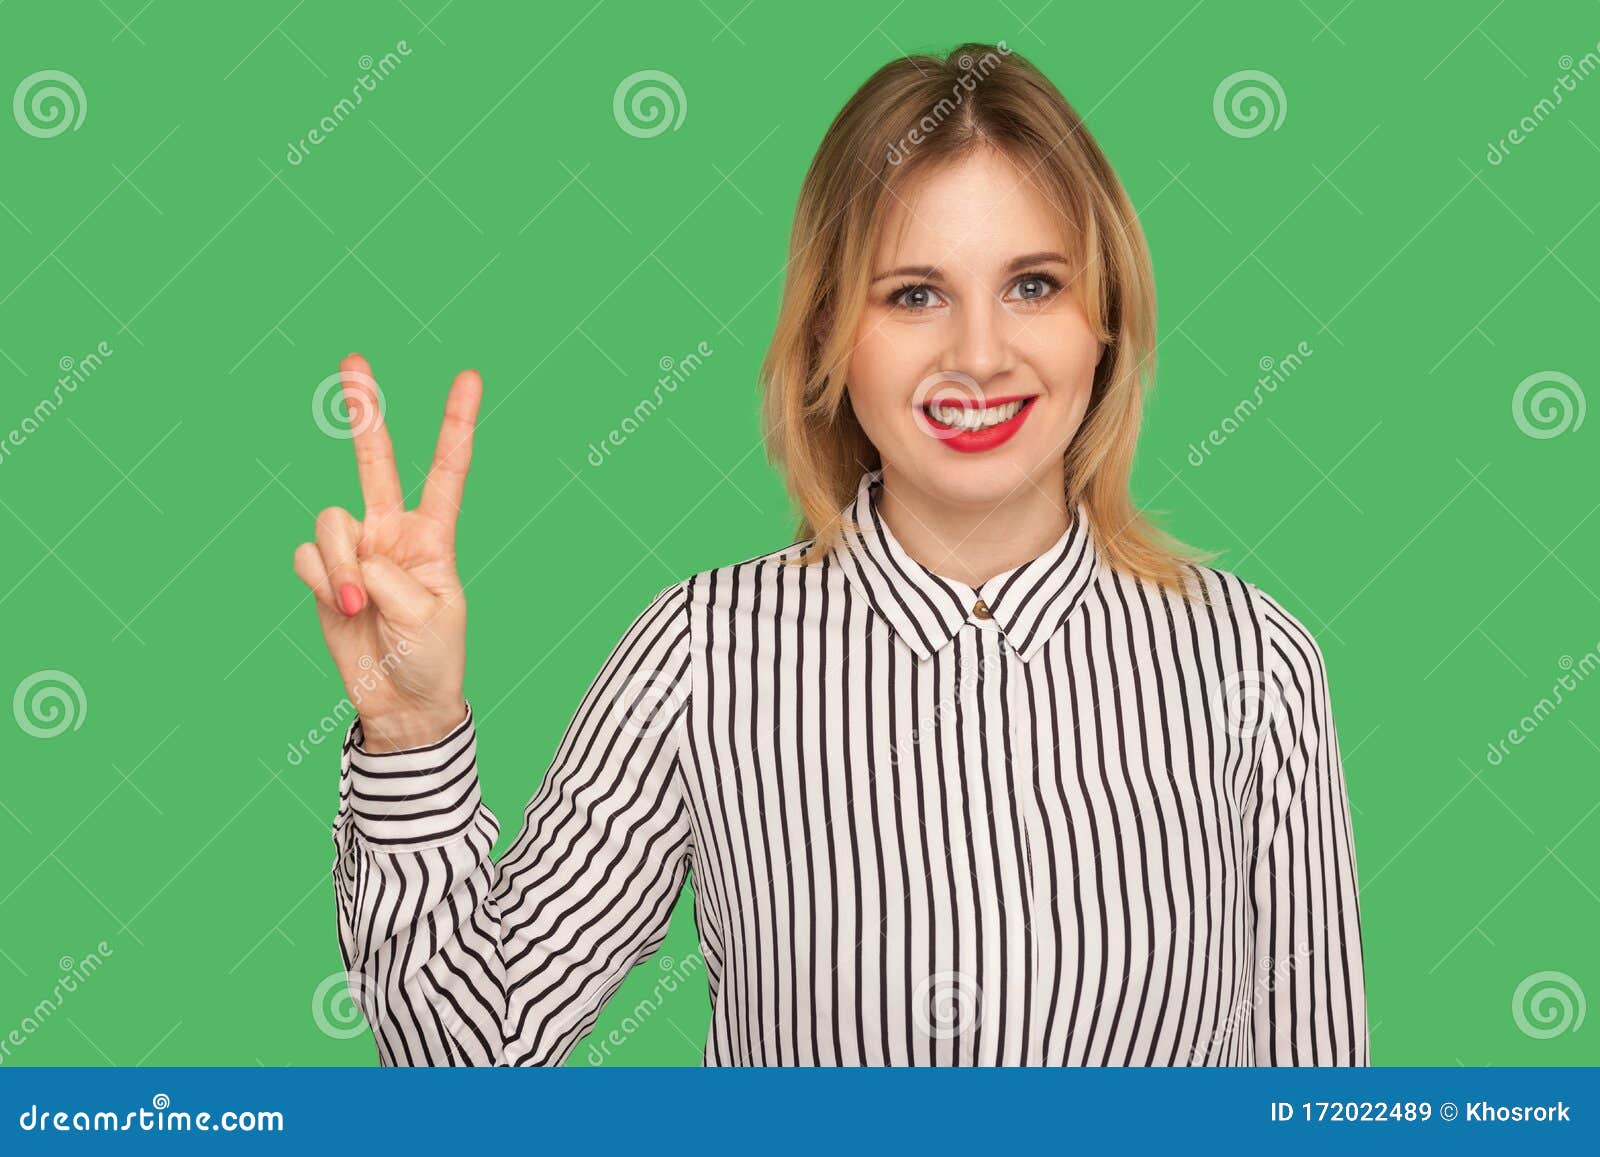 Portrait Of Happy Attractive Girl In Striped Blouse Showing Two Finger ...